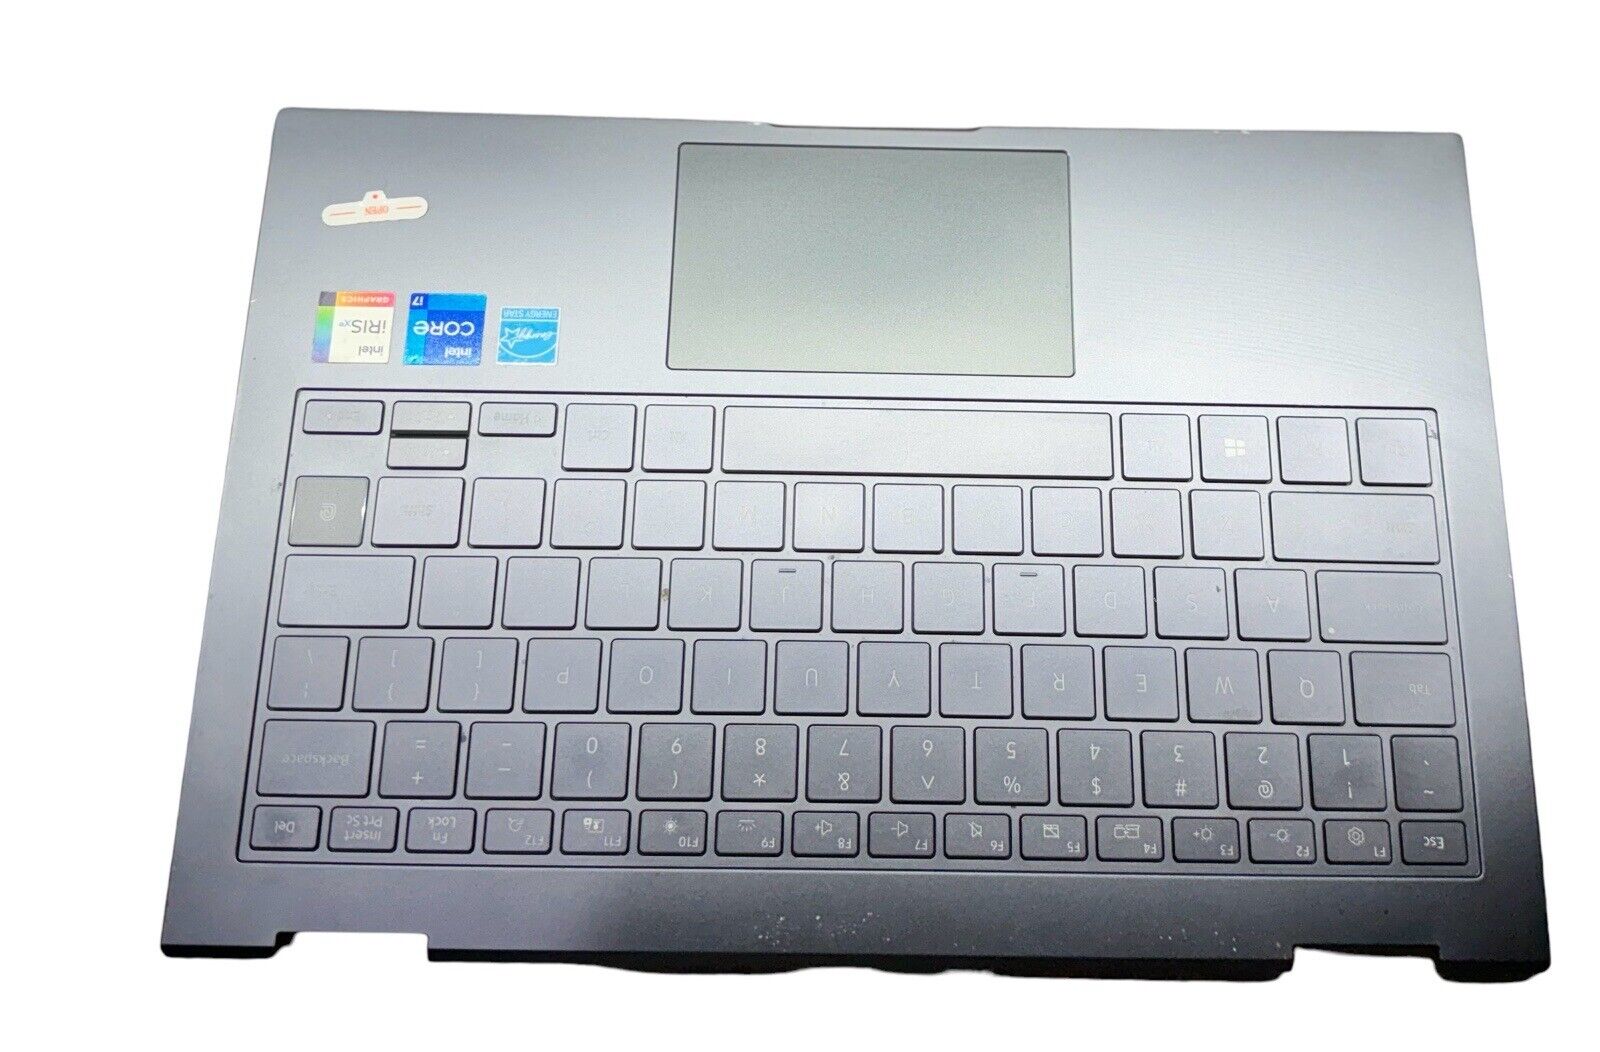 Samsung US Palmrest Keyboard Mystic Silver NP730QDA + Touchpad Assembly Used.